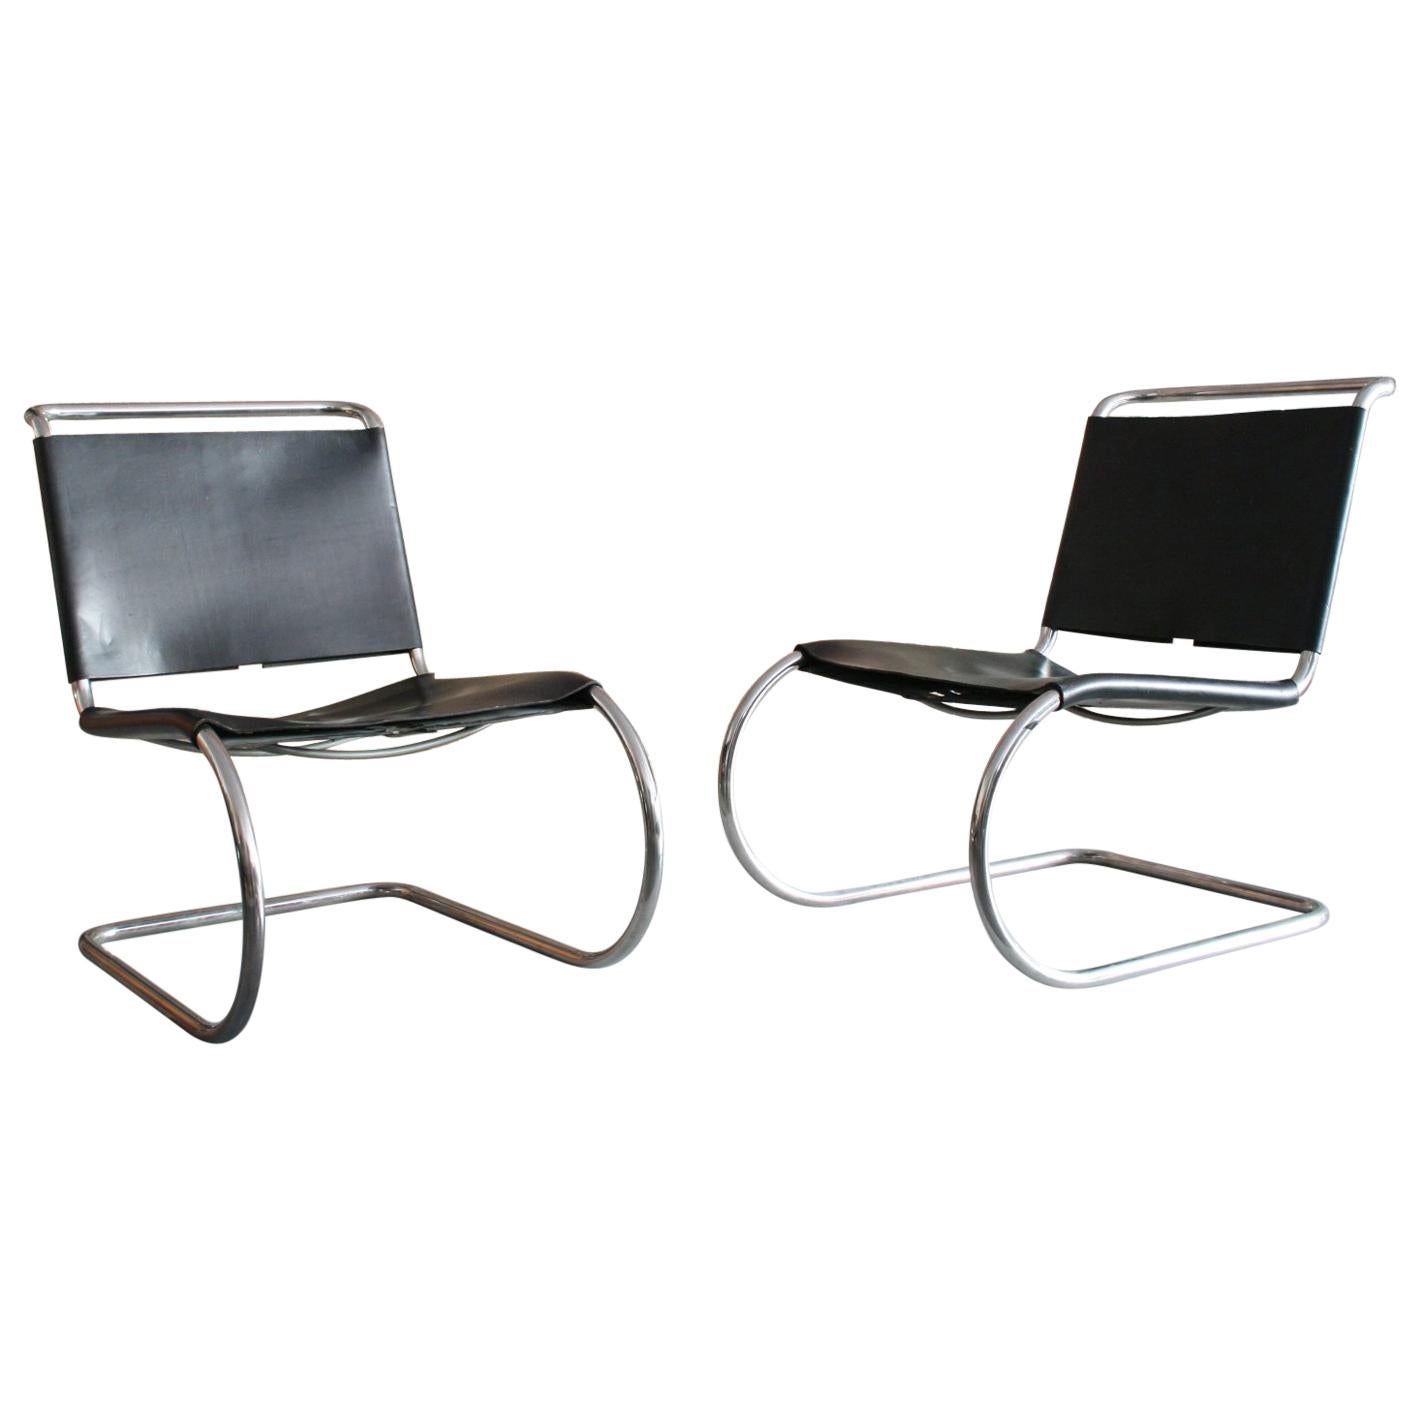 Mies van der Rohe Cantilever Leather Model MR 30/5 Lounge Chairs for Knoll